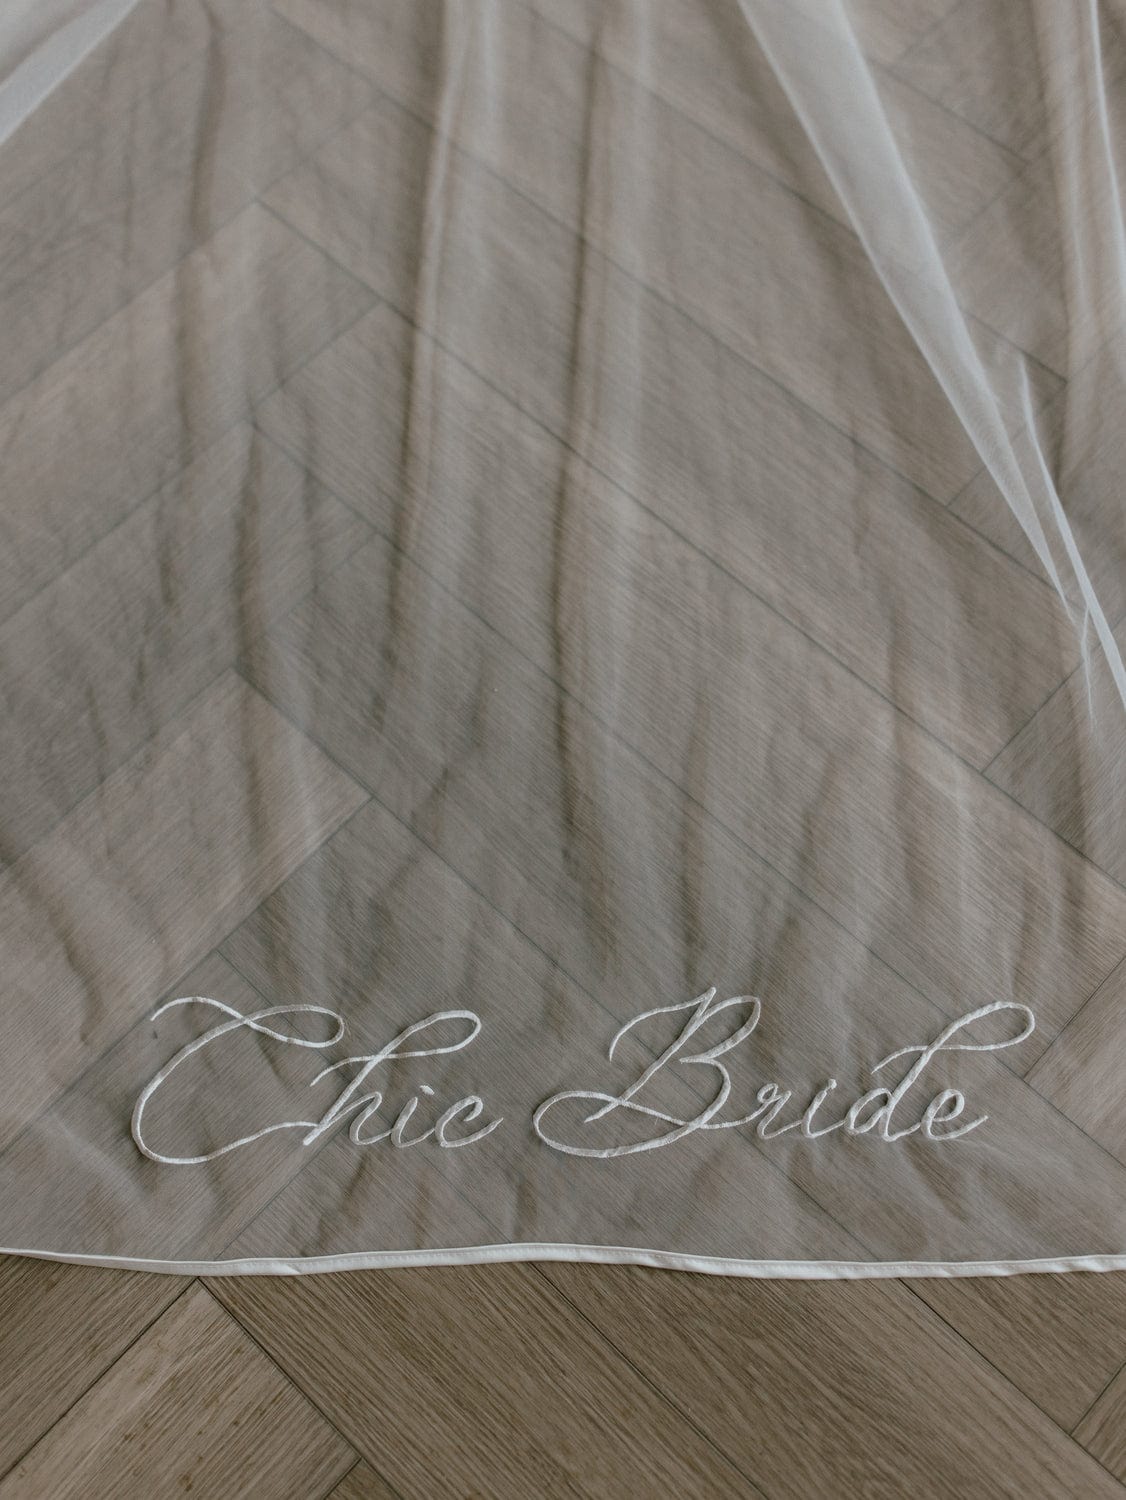 Chic Bridals Wedding Dresses Veil with Crepe Edging and Custom Embroidery Wedding Gowns